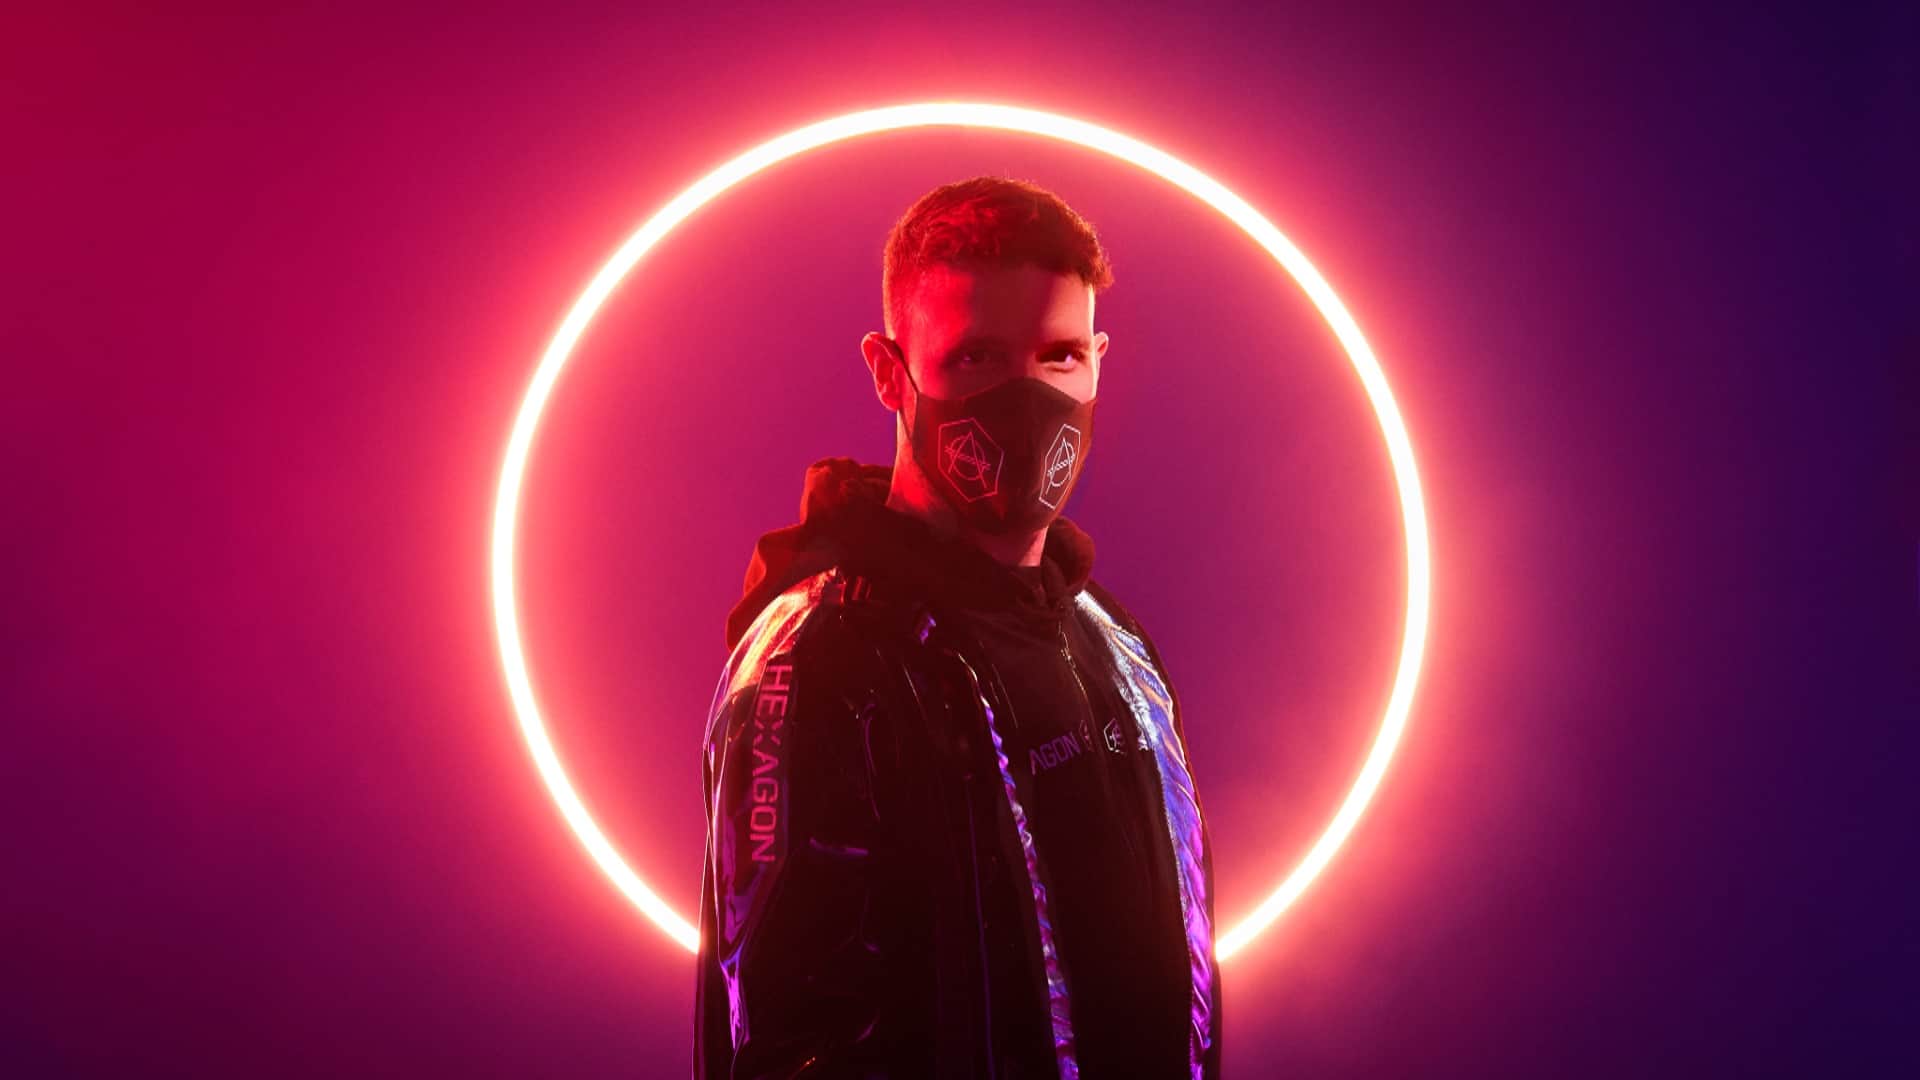 Don Diablo returns to release radar with ‘All That You Need’: Listen